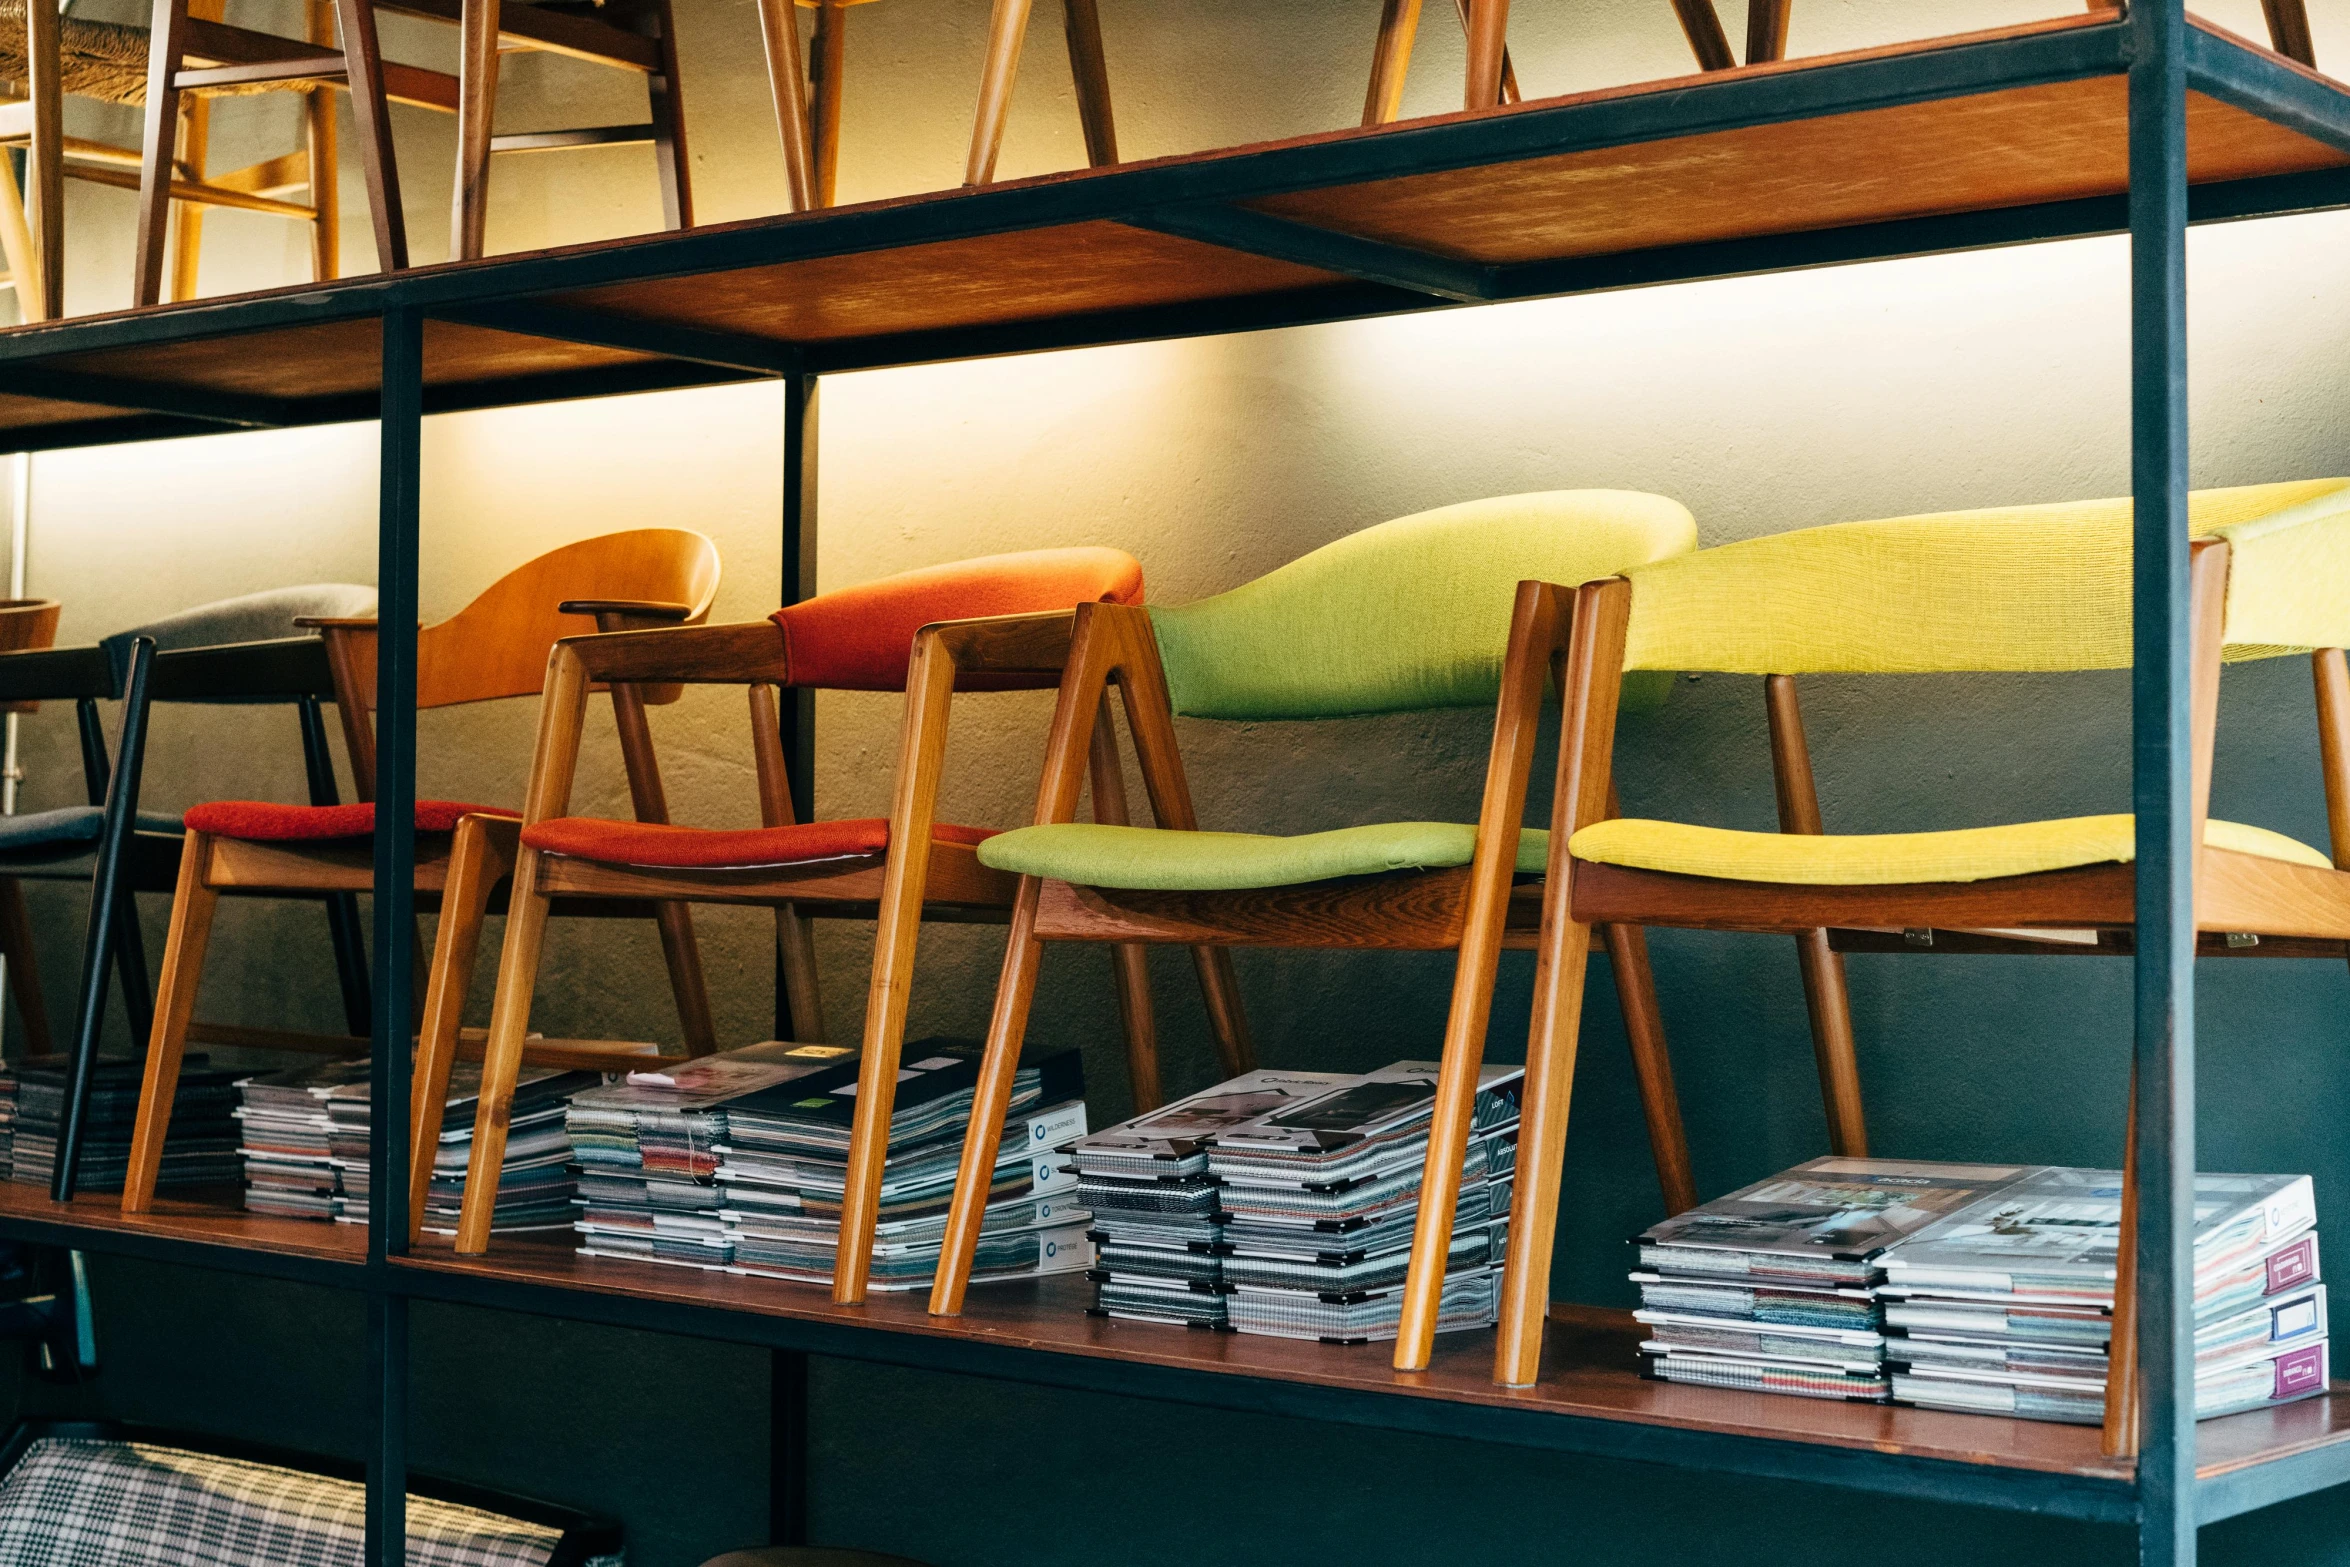 several colorful chairs sit next to each other near the bookcase